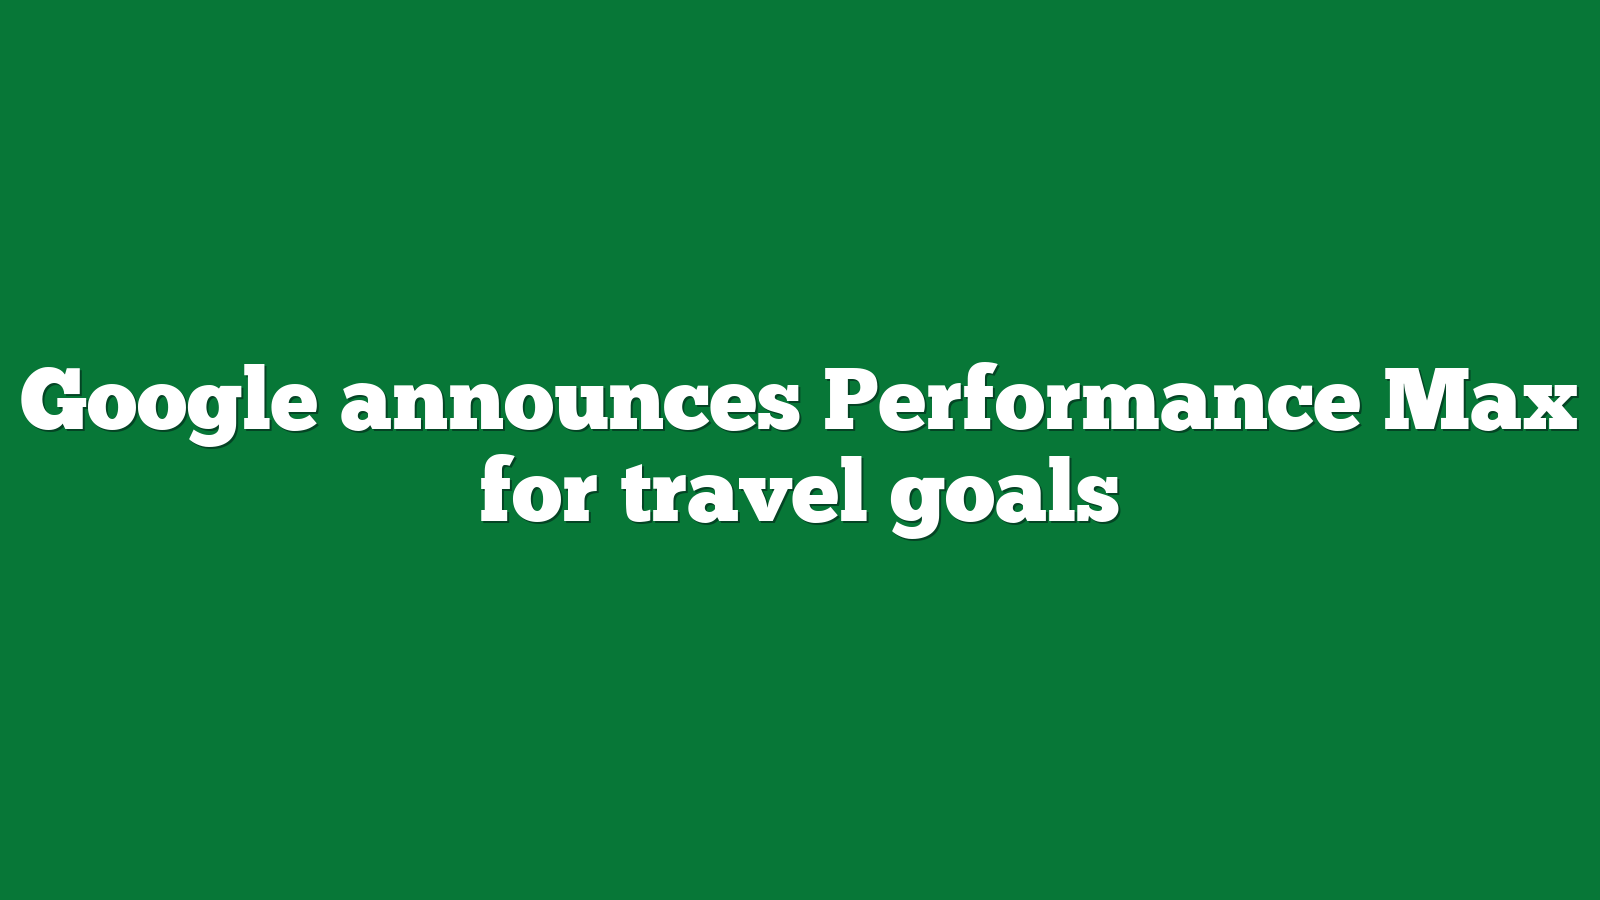 Google announces Performance Max for travel goals